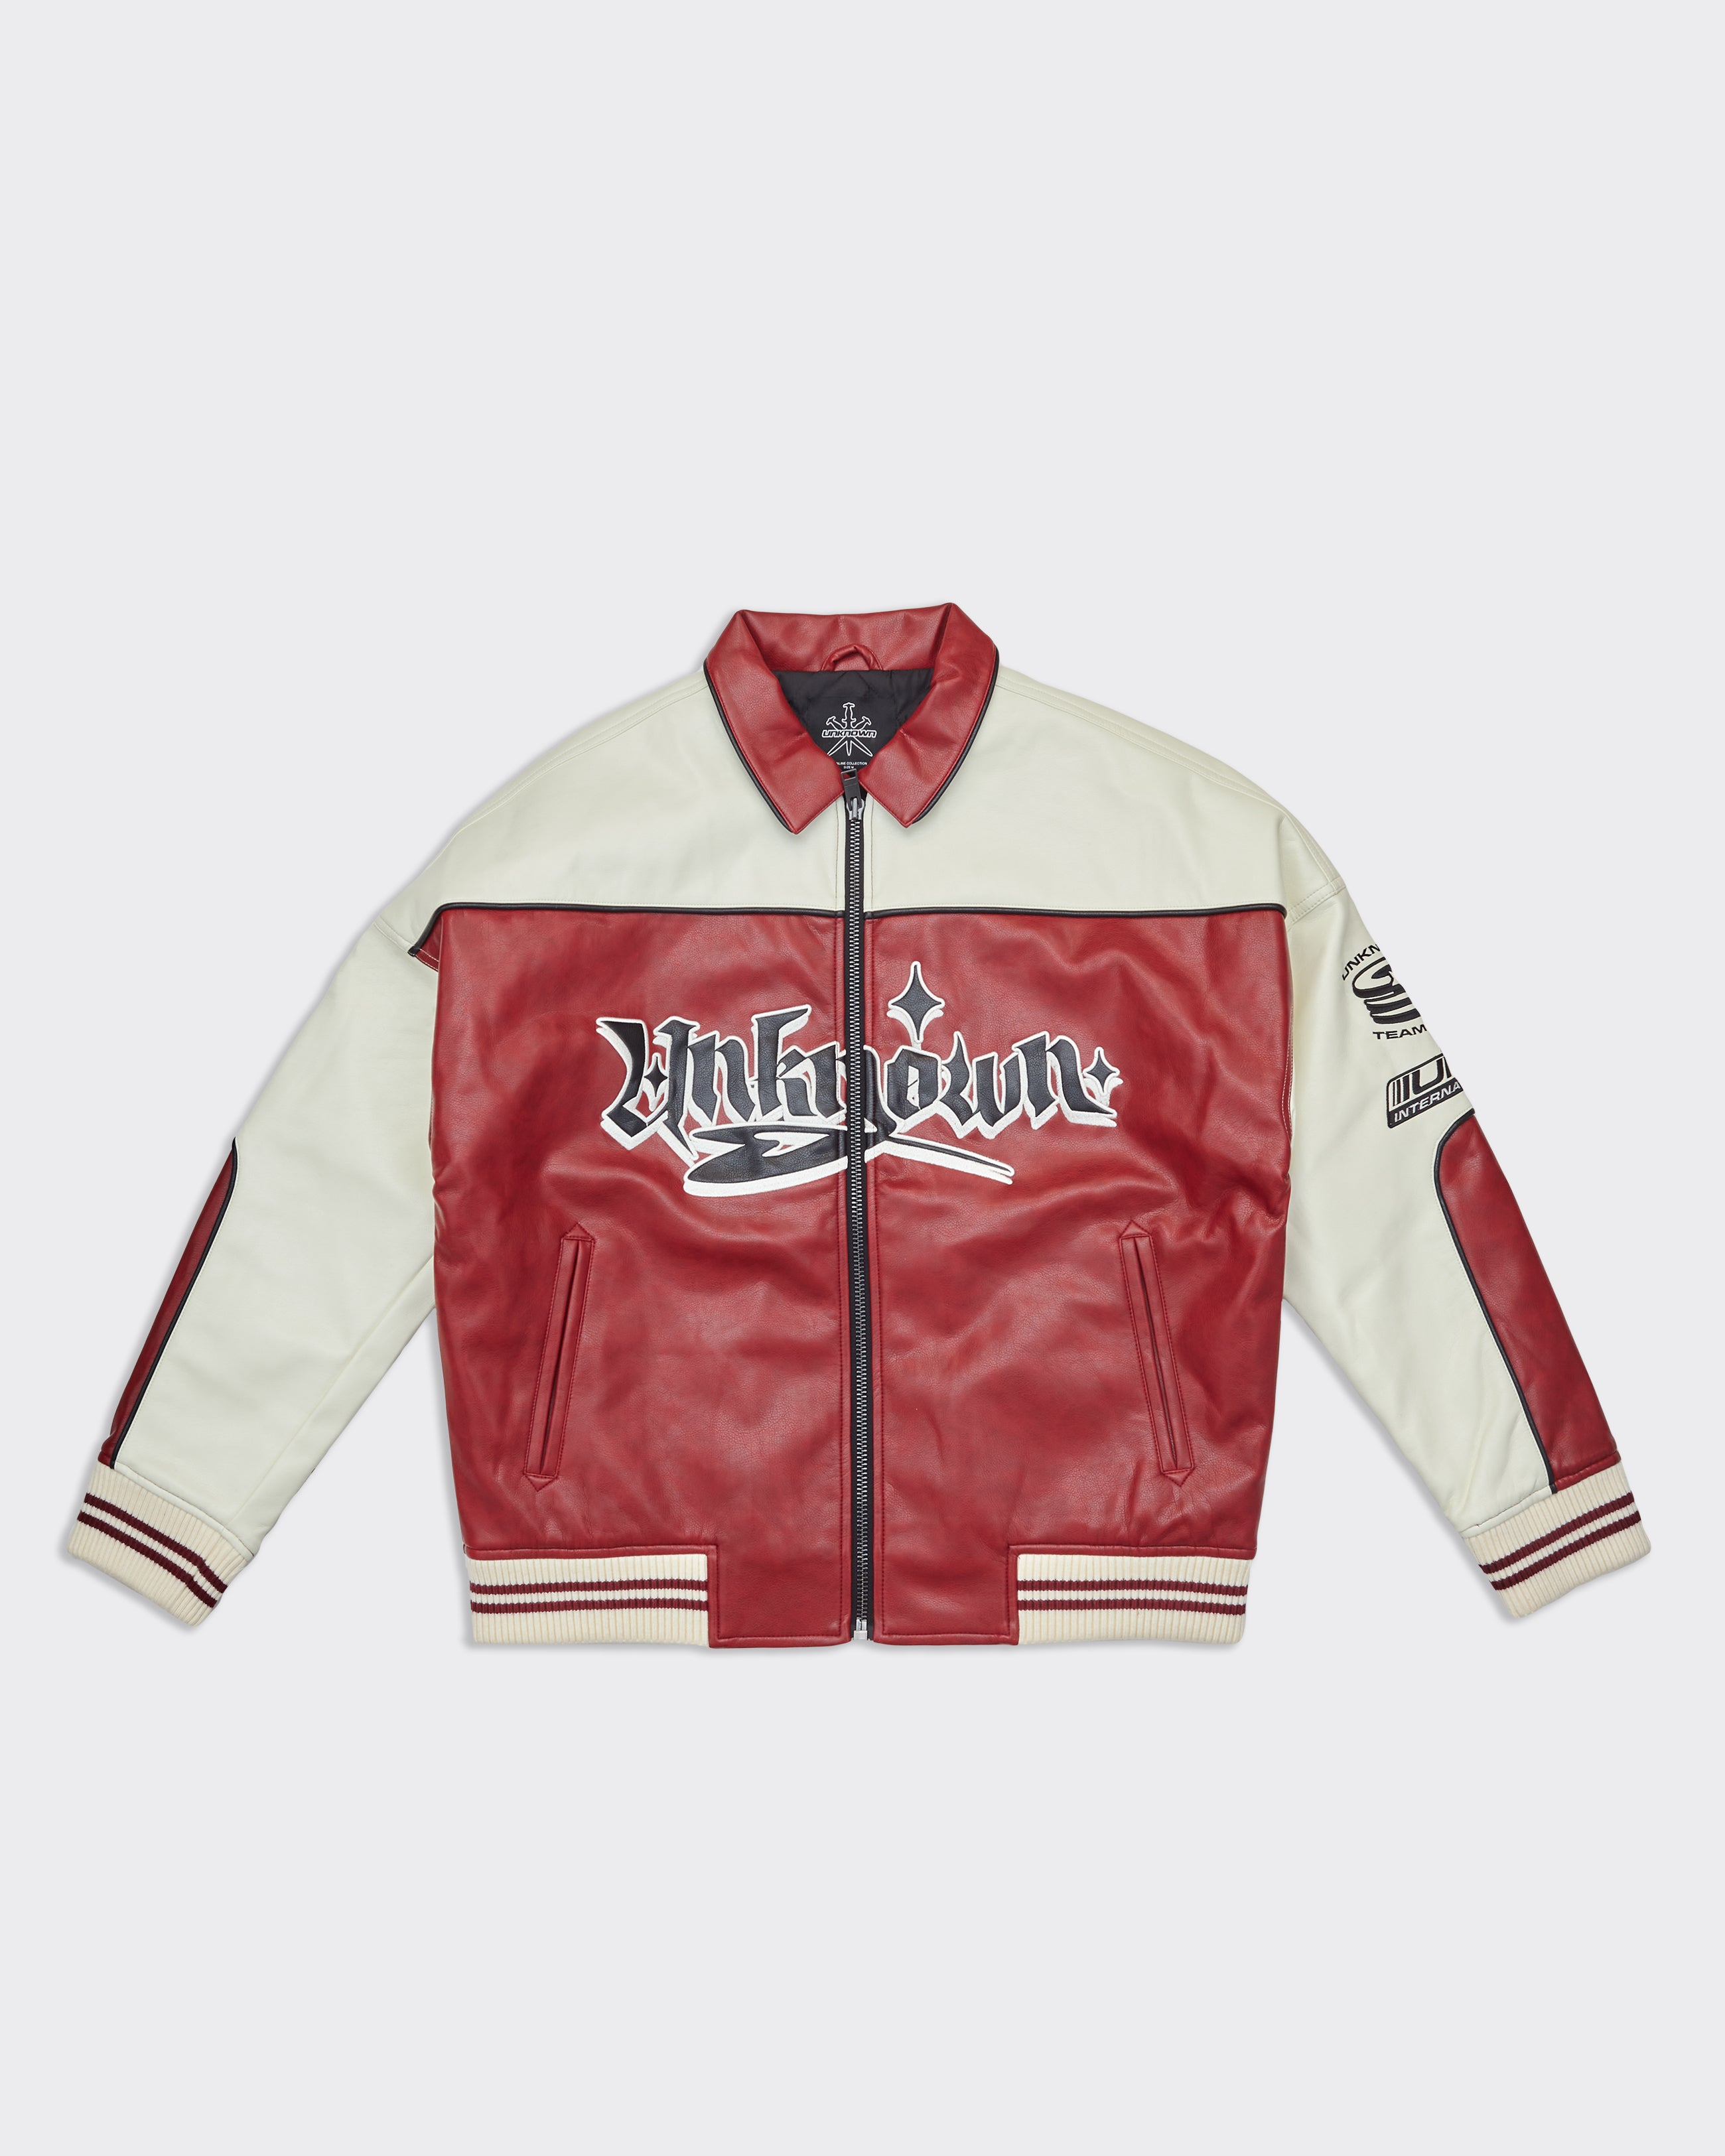 Racing Leather Jacket White Red